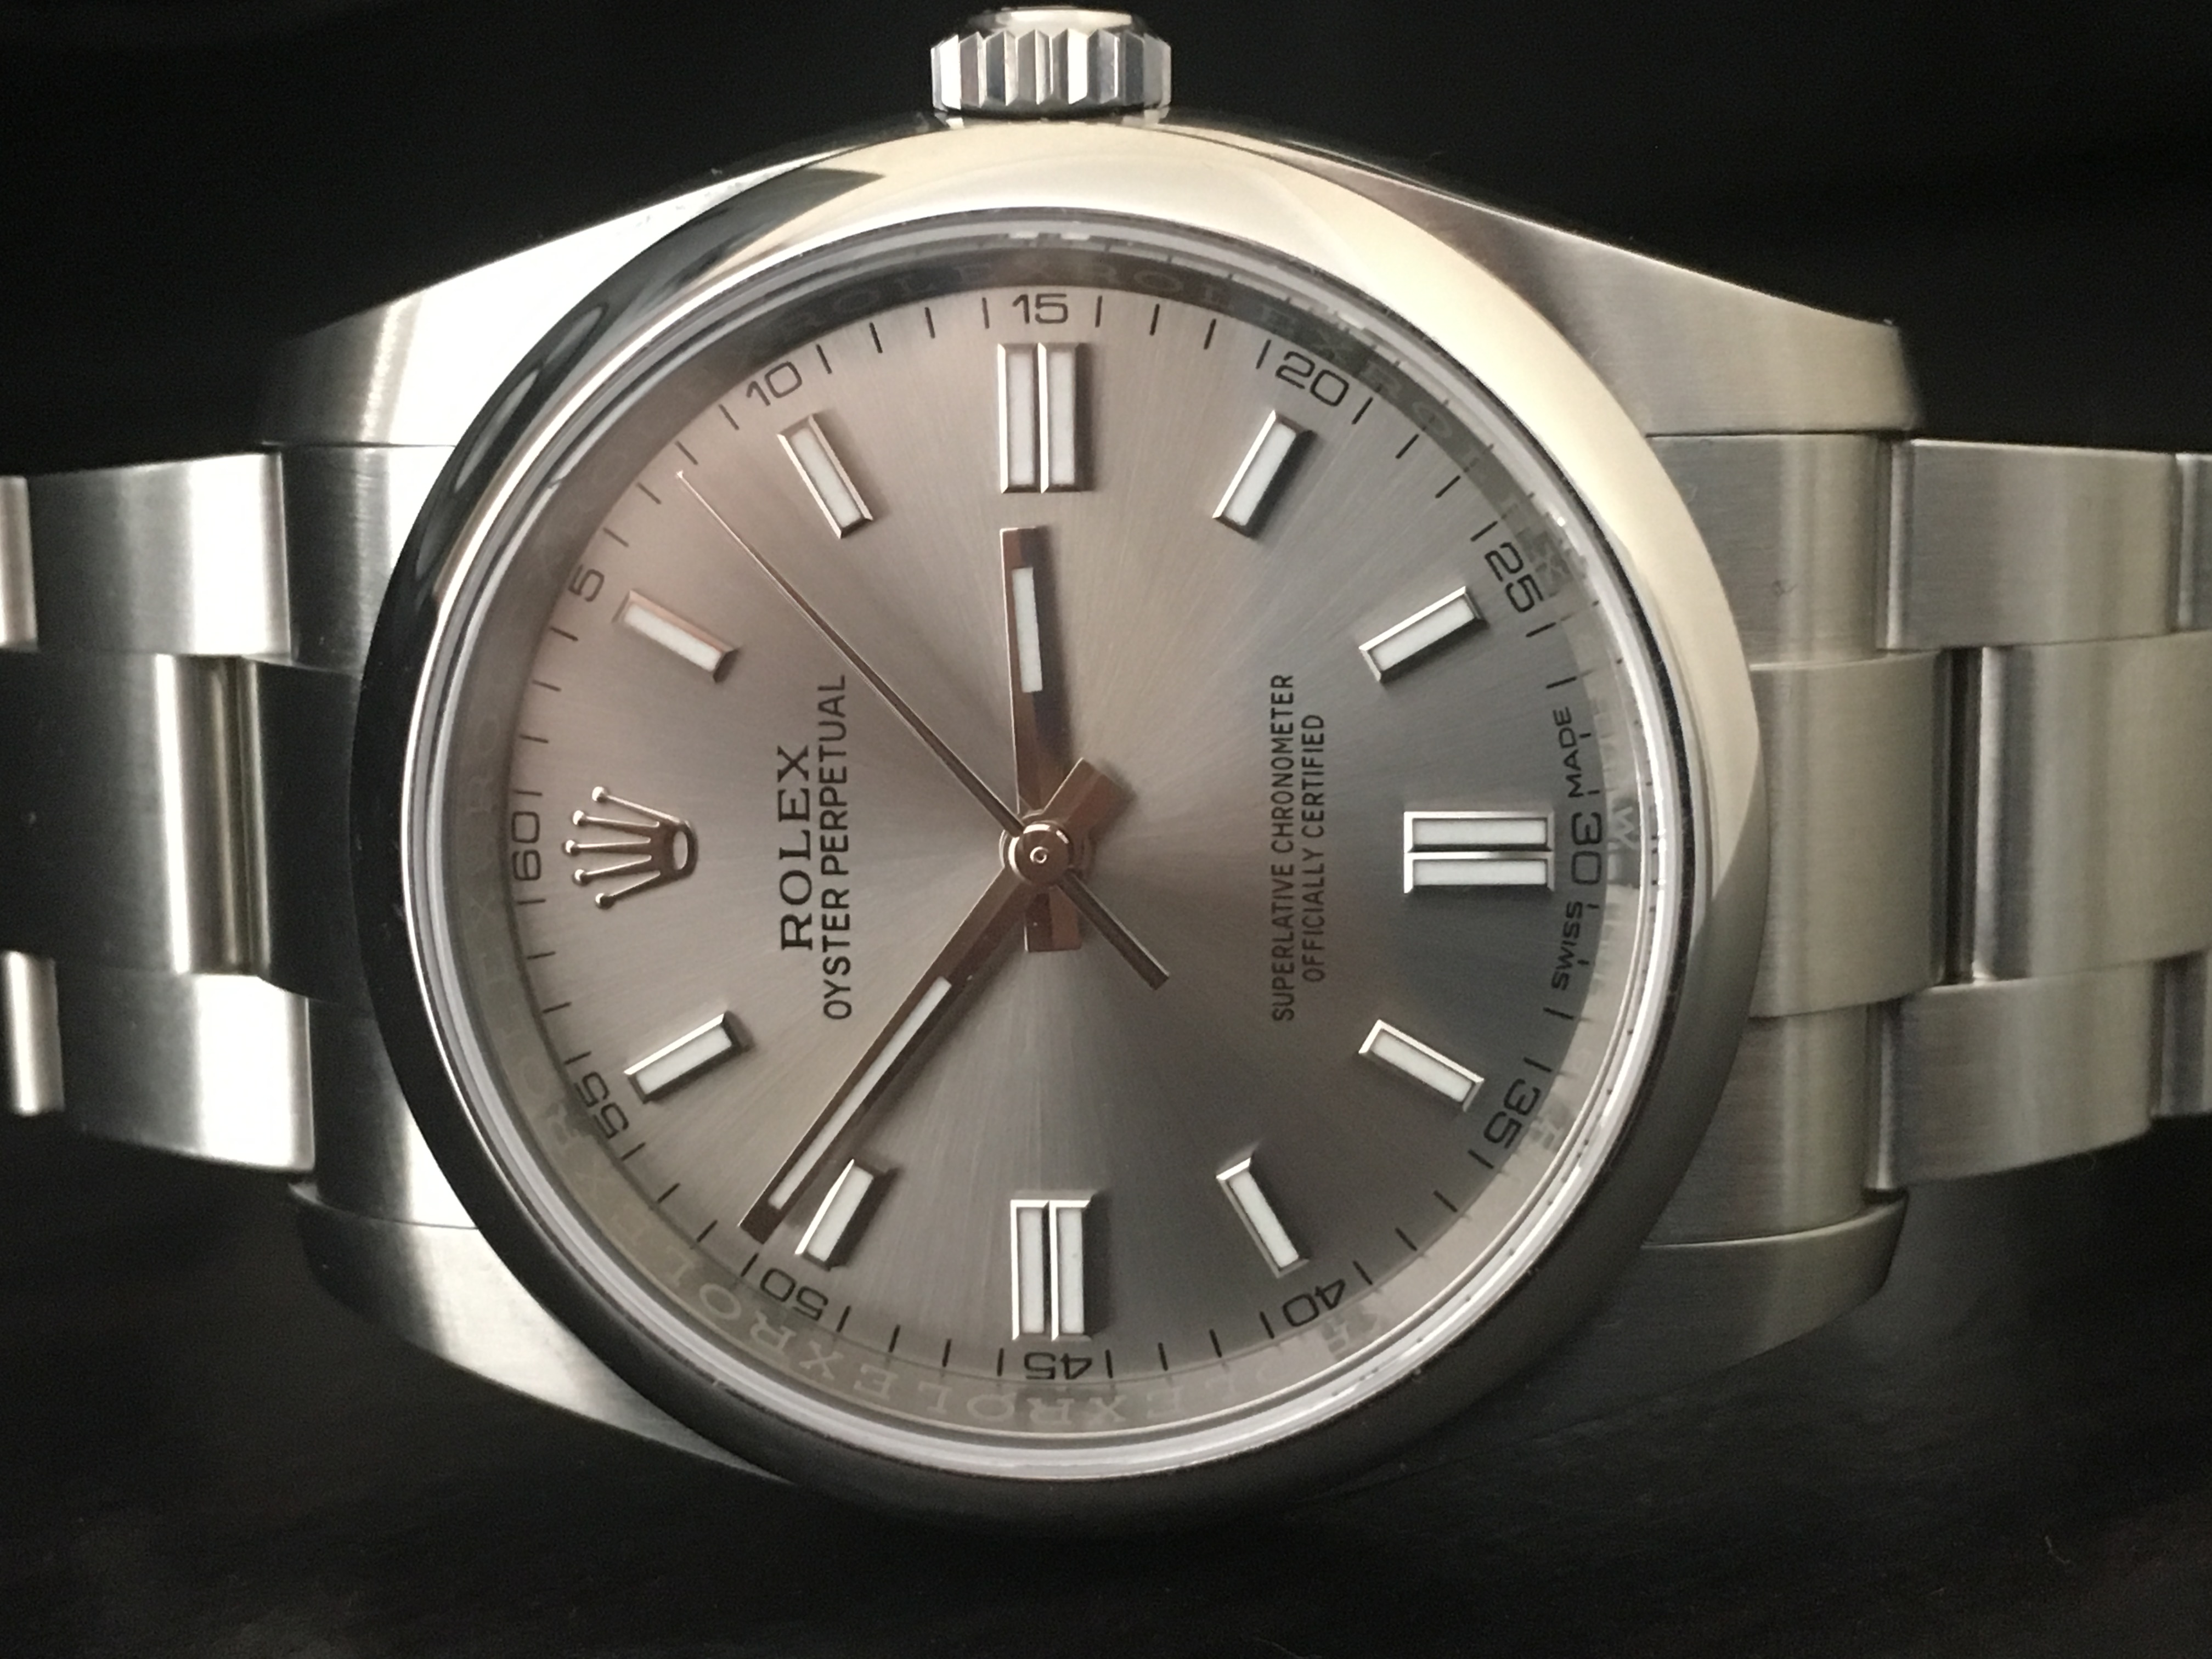 rolex oyster perpetual 116000